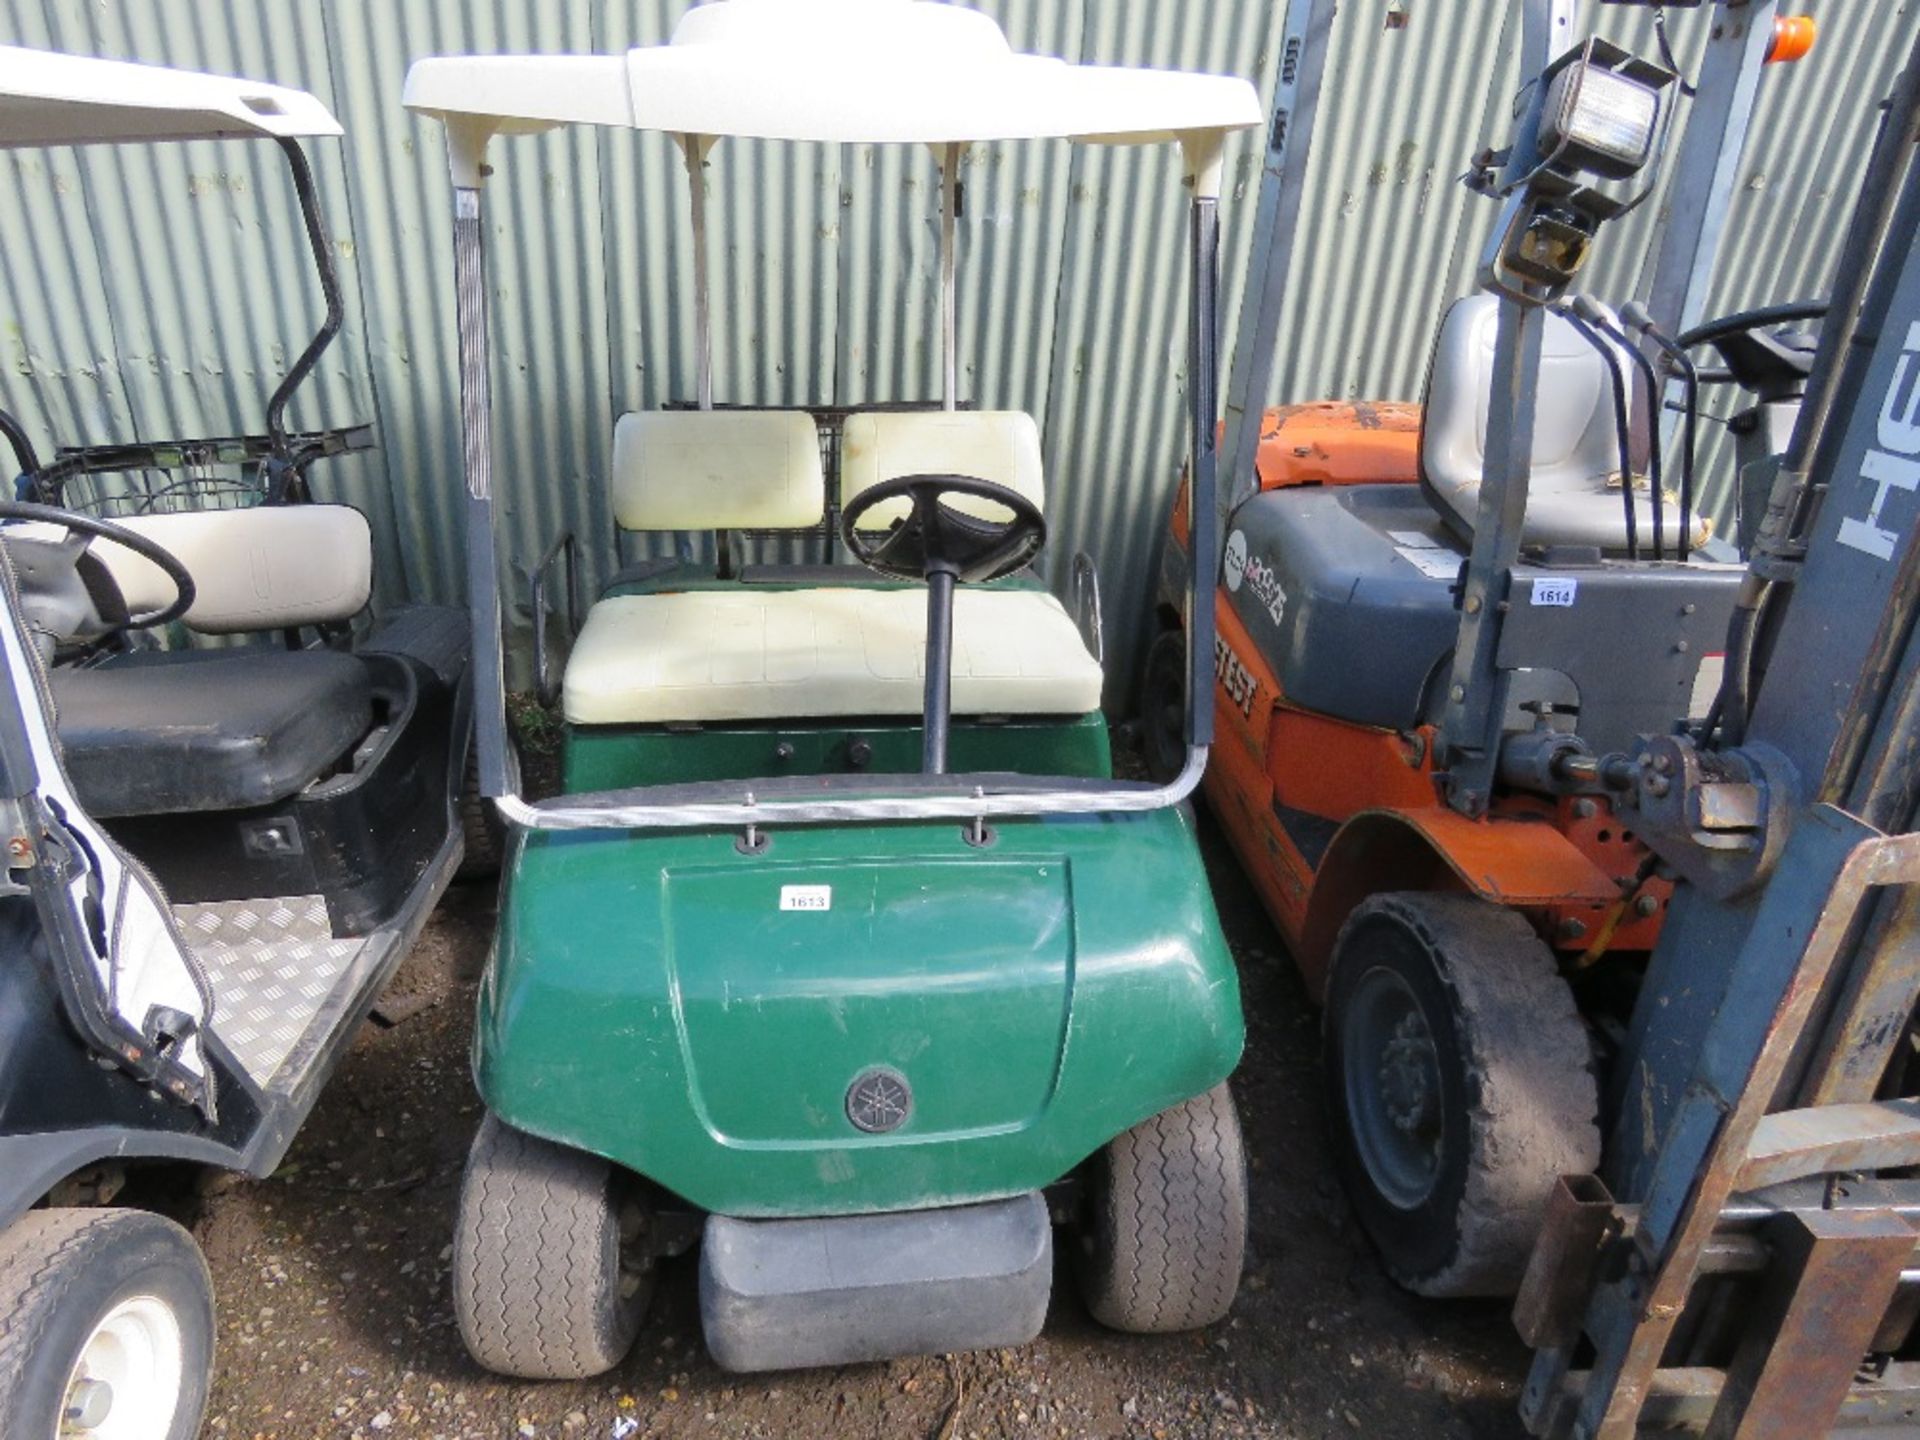 YAMAHA PETROL ENGINED GOLF BUGGY. WHEN TESTED WAS SEEN TO RUN AND DRIVE...SEE VIDEO. - Image 2 of 8